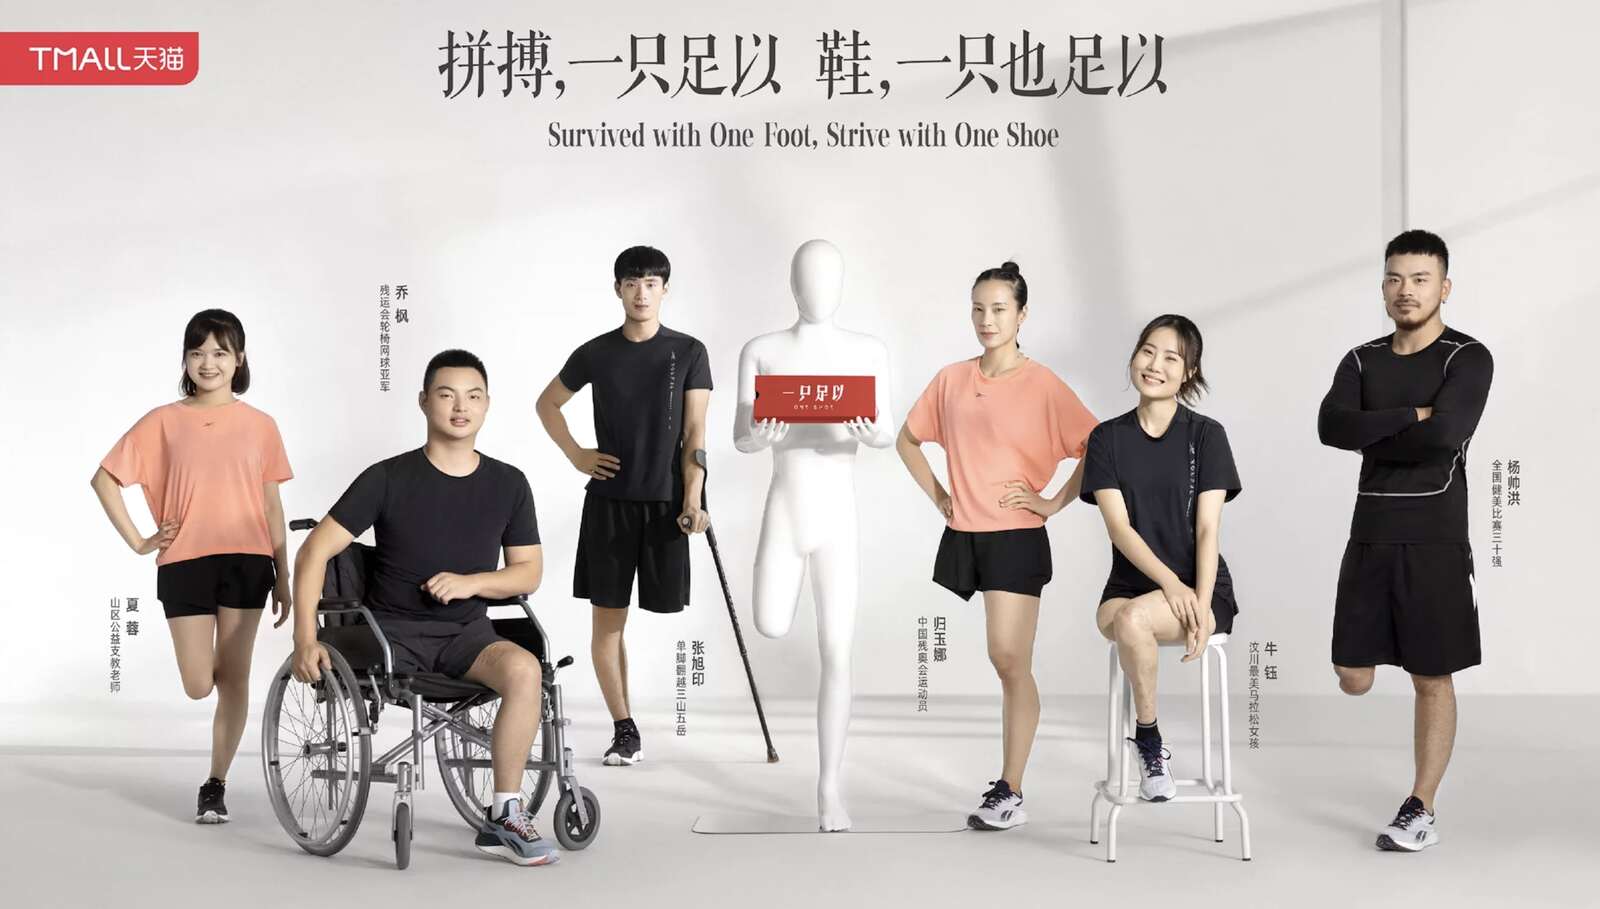 Tmall, One Shoe Project, campaigns of the world